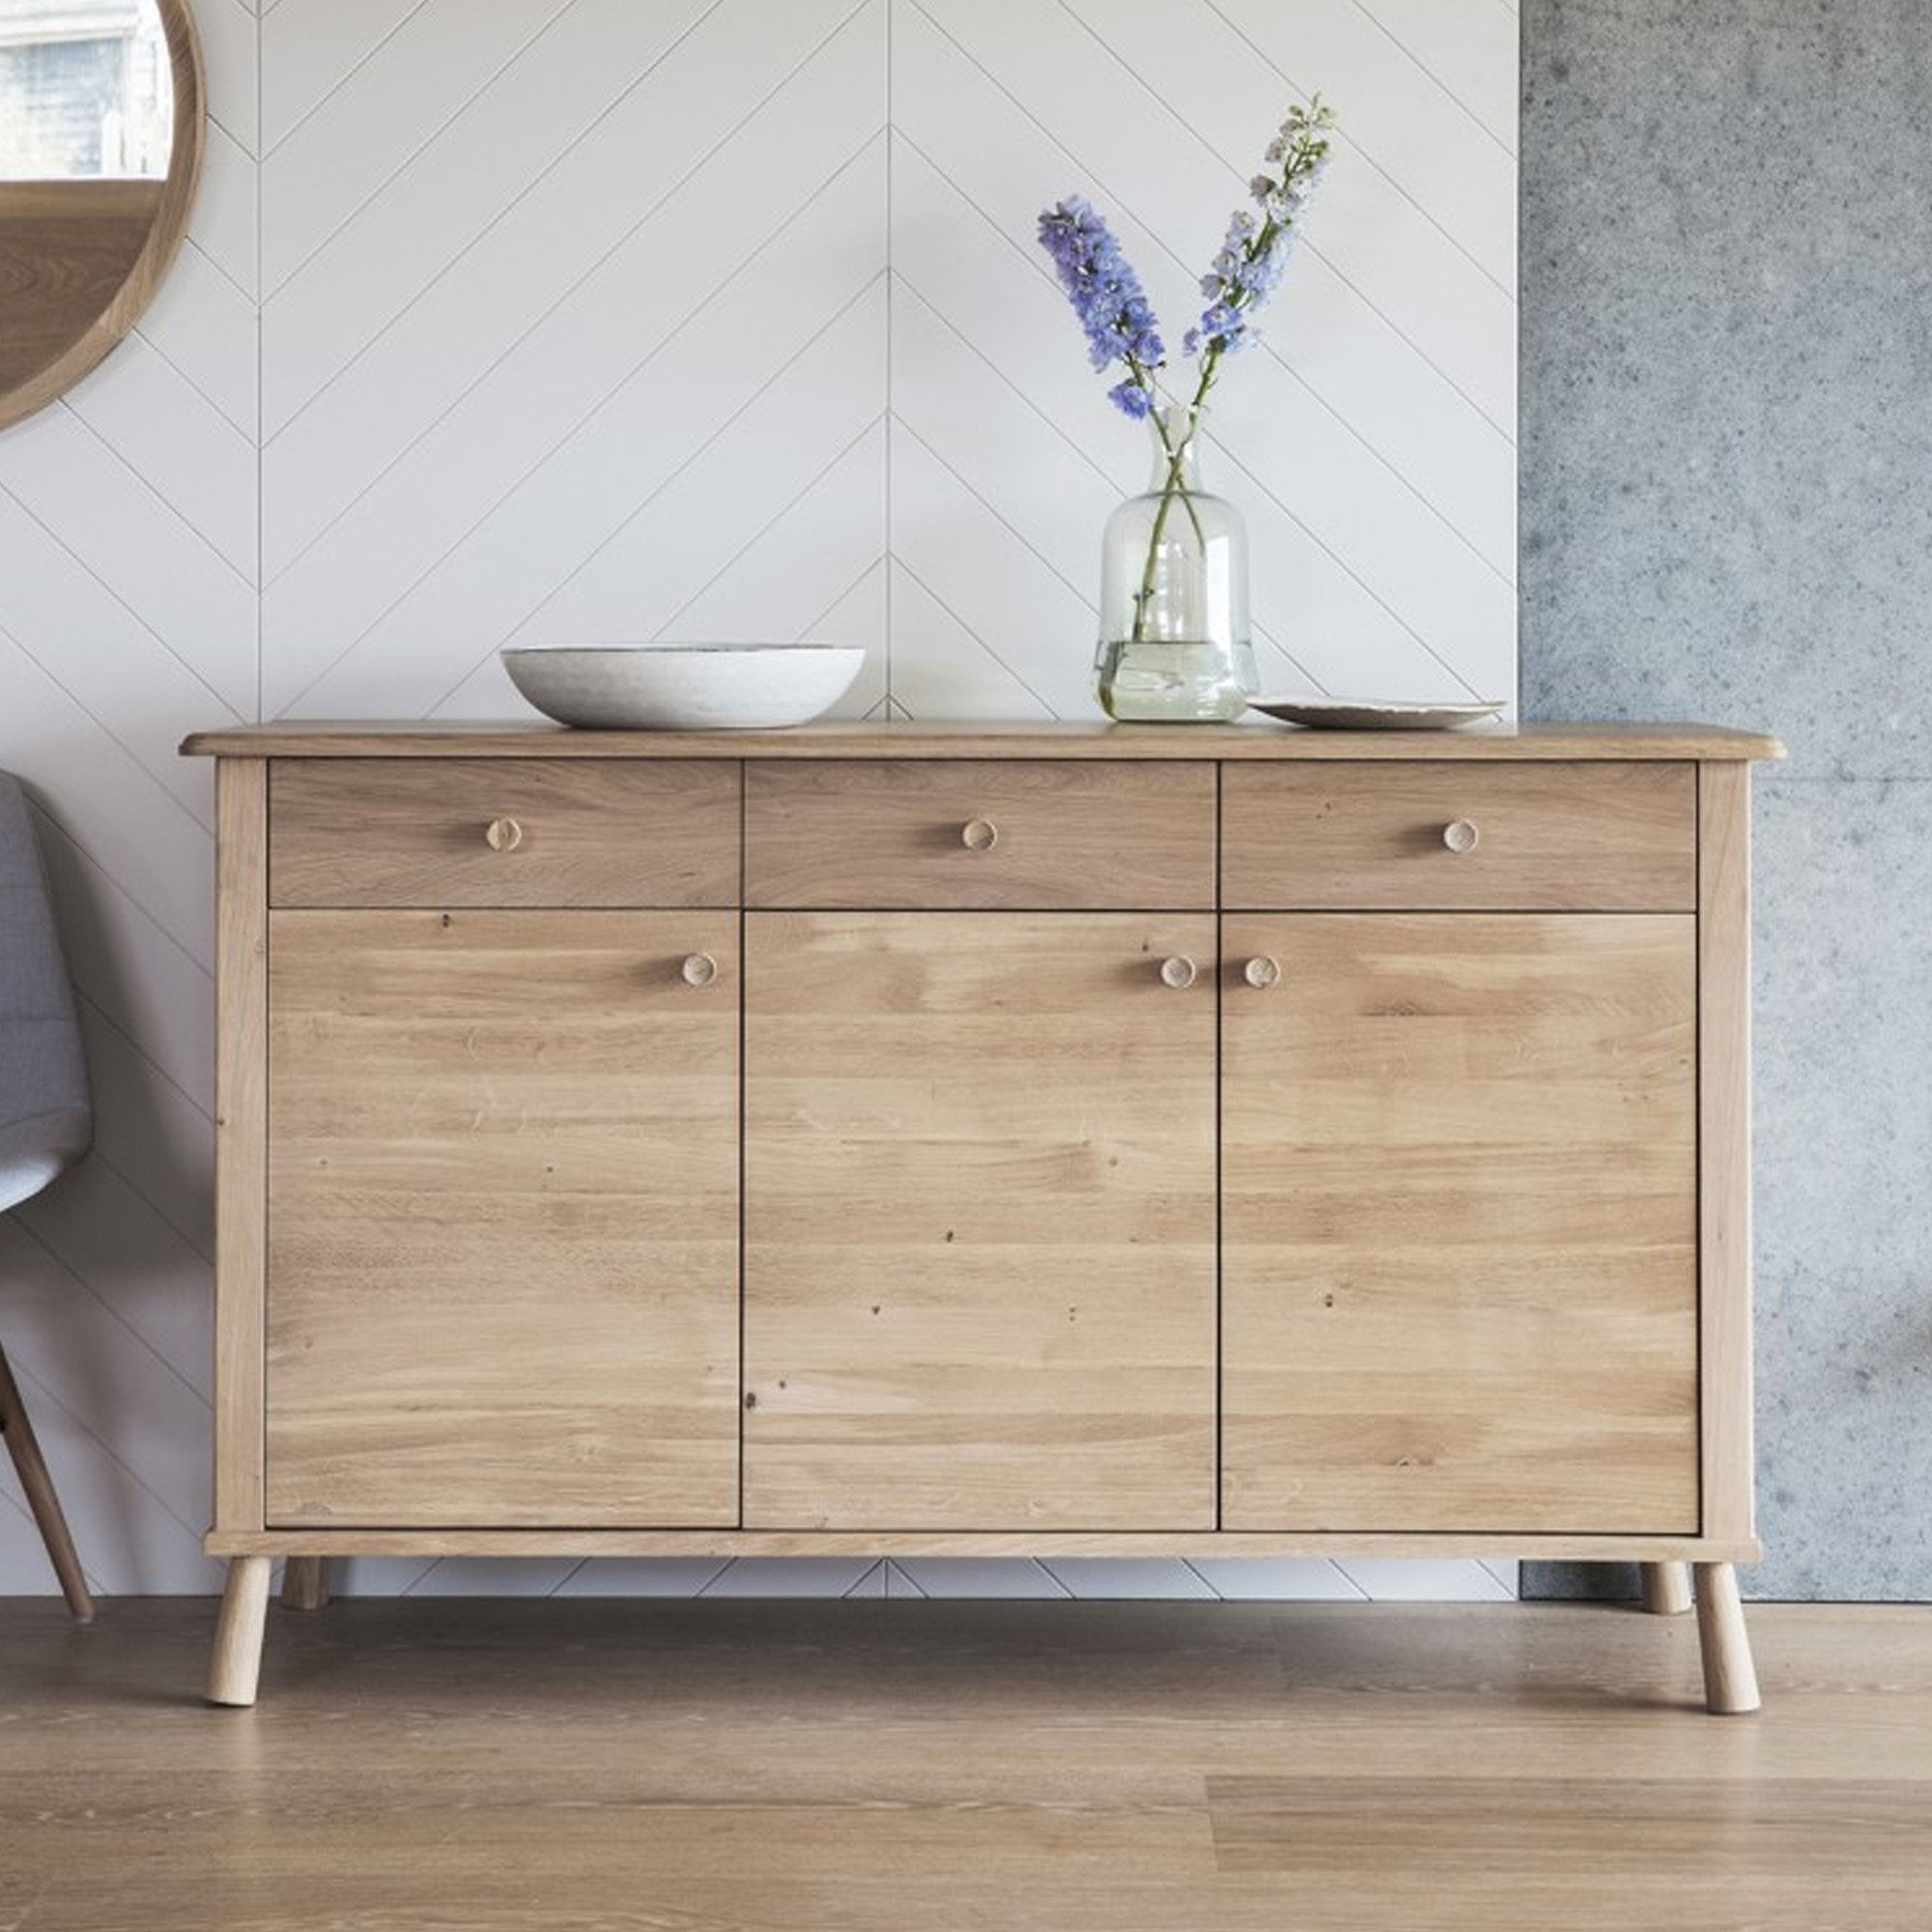 Wooden Sideboards With Storage With Regard To Recent Sideboards With 3 Drawers (View 7 of 15)